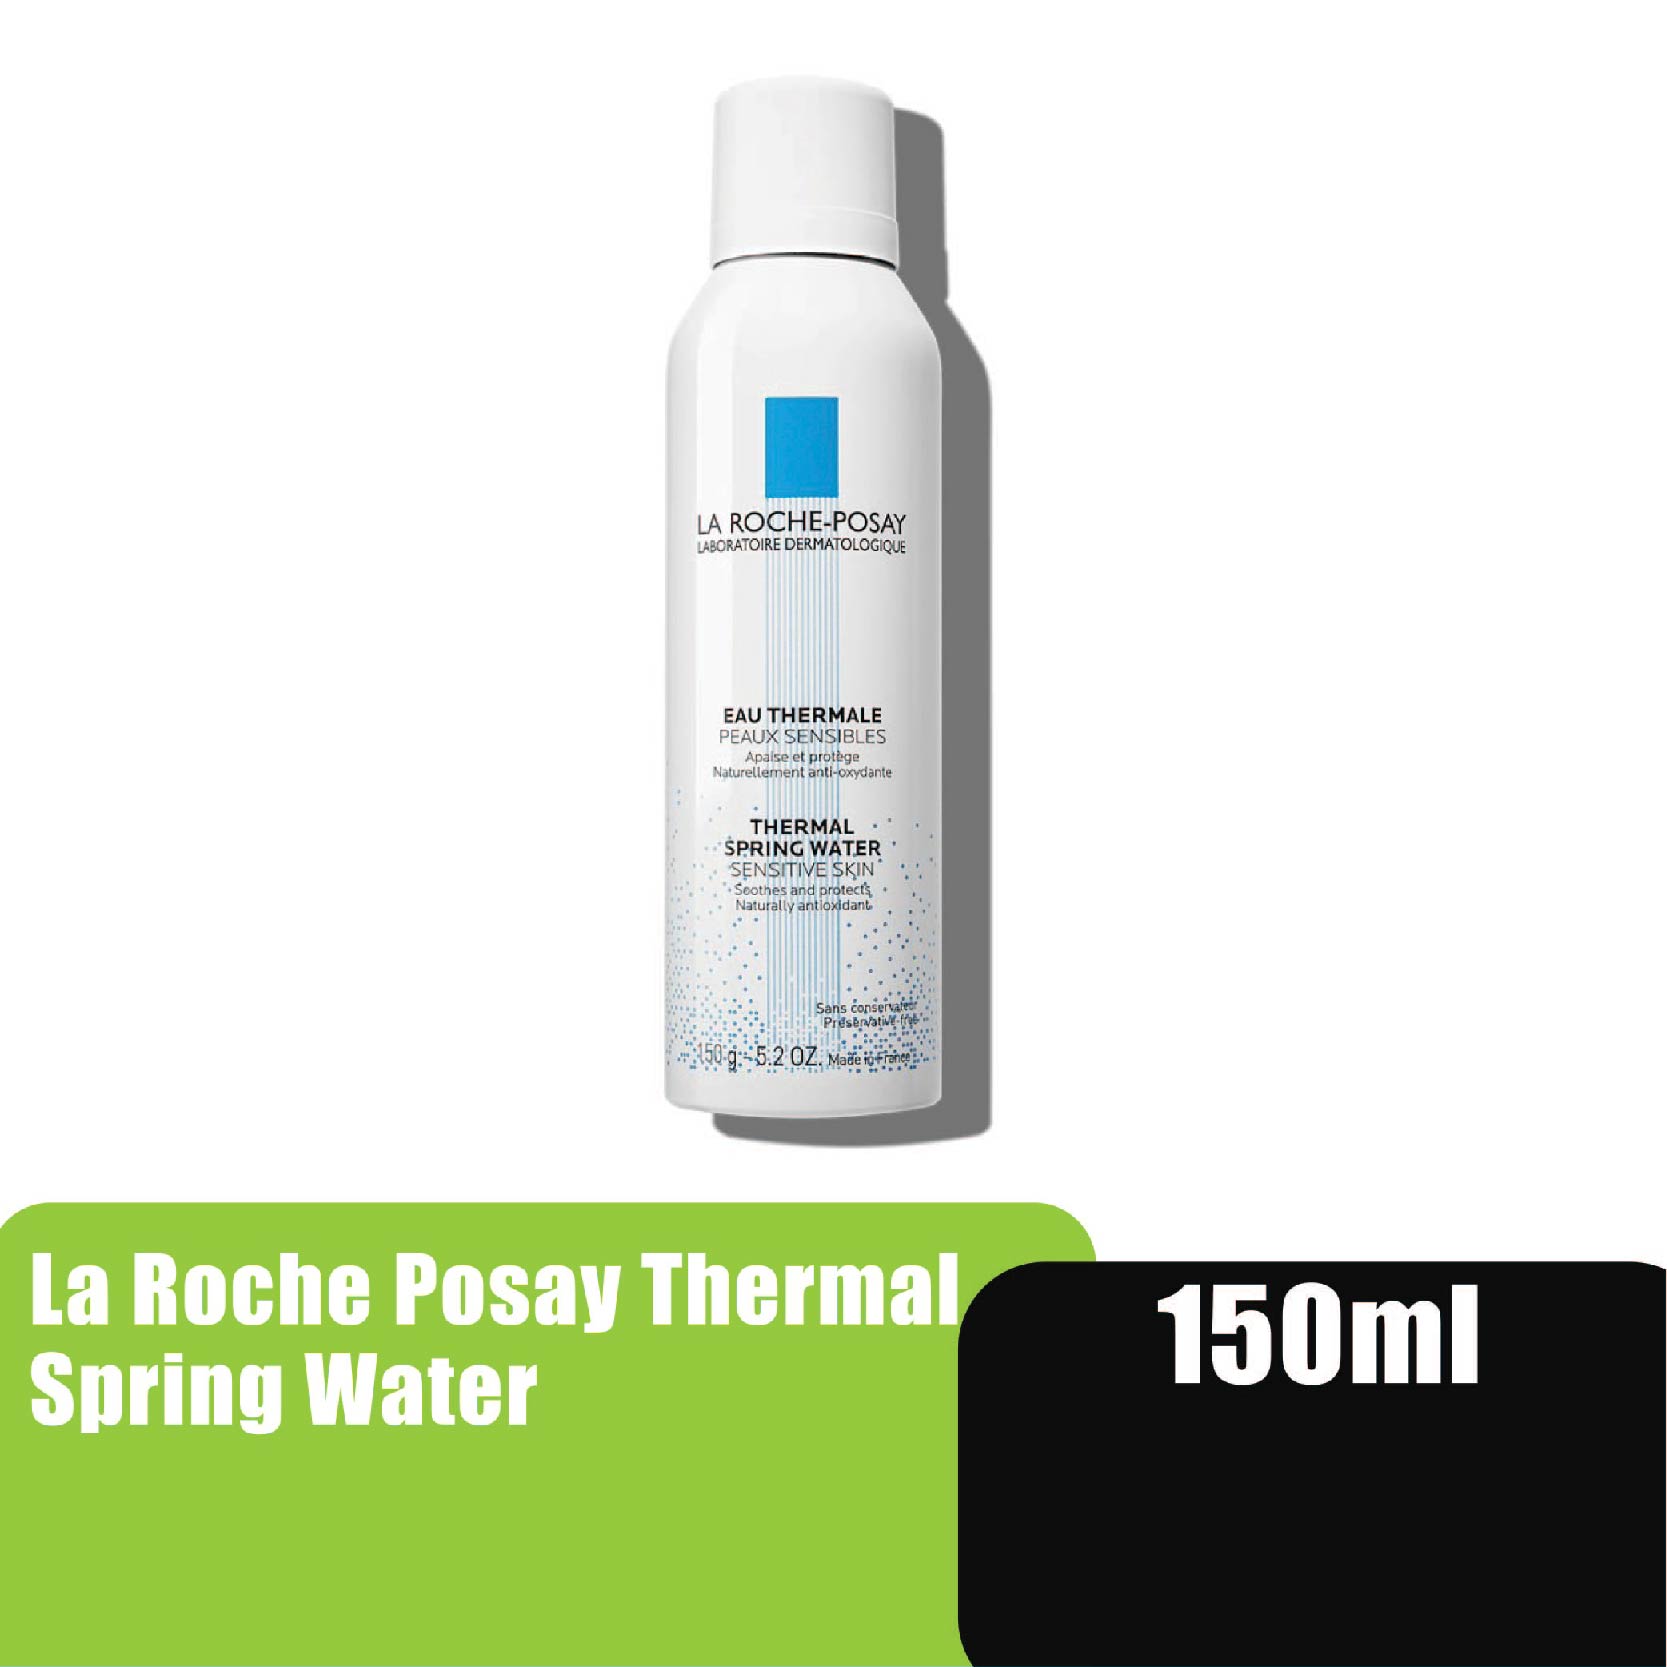 LA ROCHE POSAY Thermal Spring Water Soothing Face Mist Spray 150ml - For Sensitive & Irritated Skin 補水噴霧